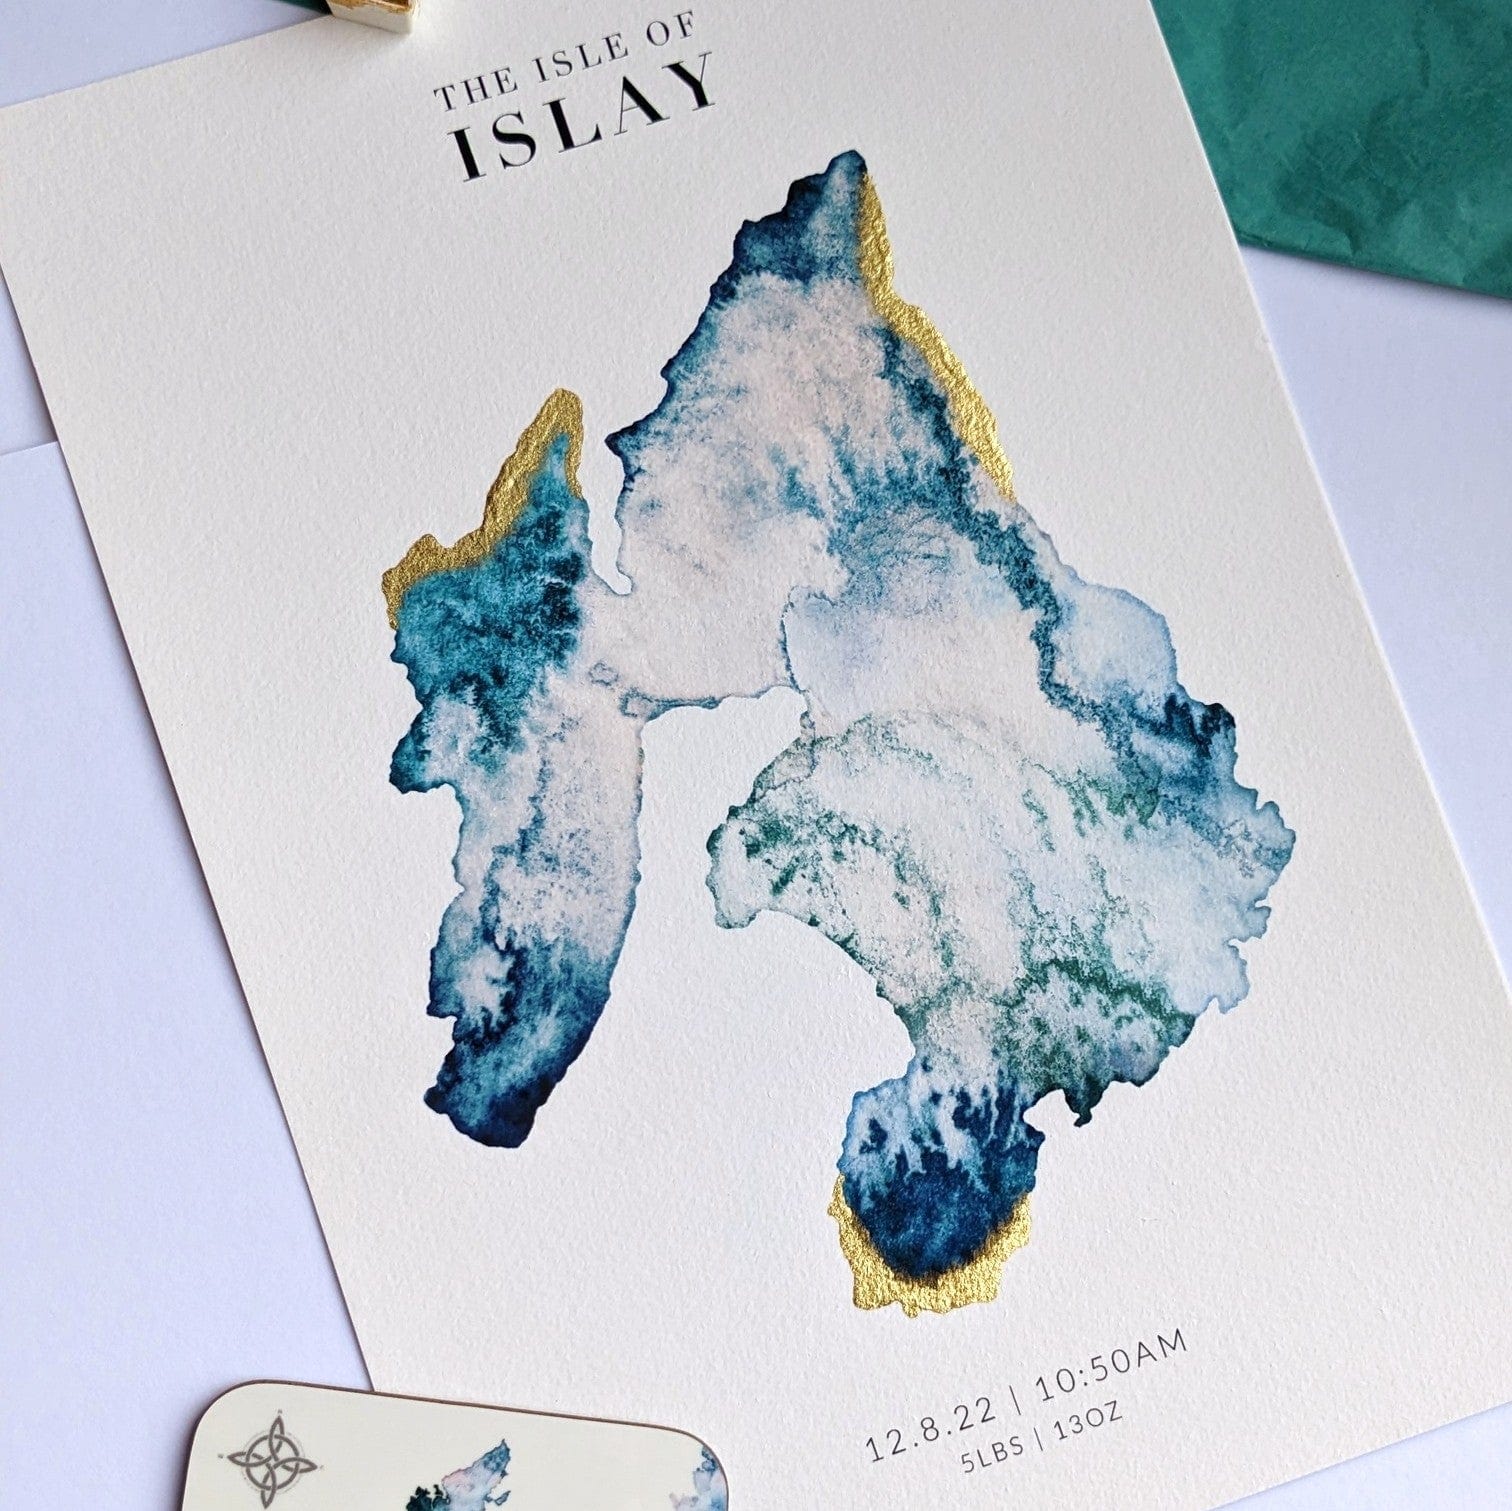 EJayDesign Scottish Prints A3 Unframed Giclée / Turquoise Isle of Islay Watercolour Map